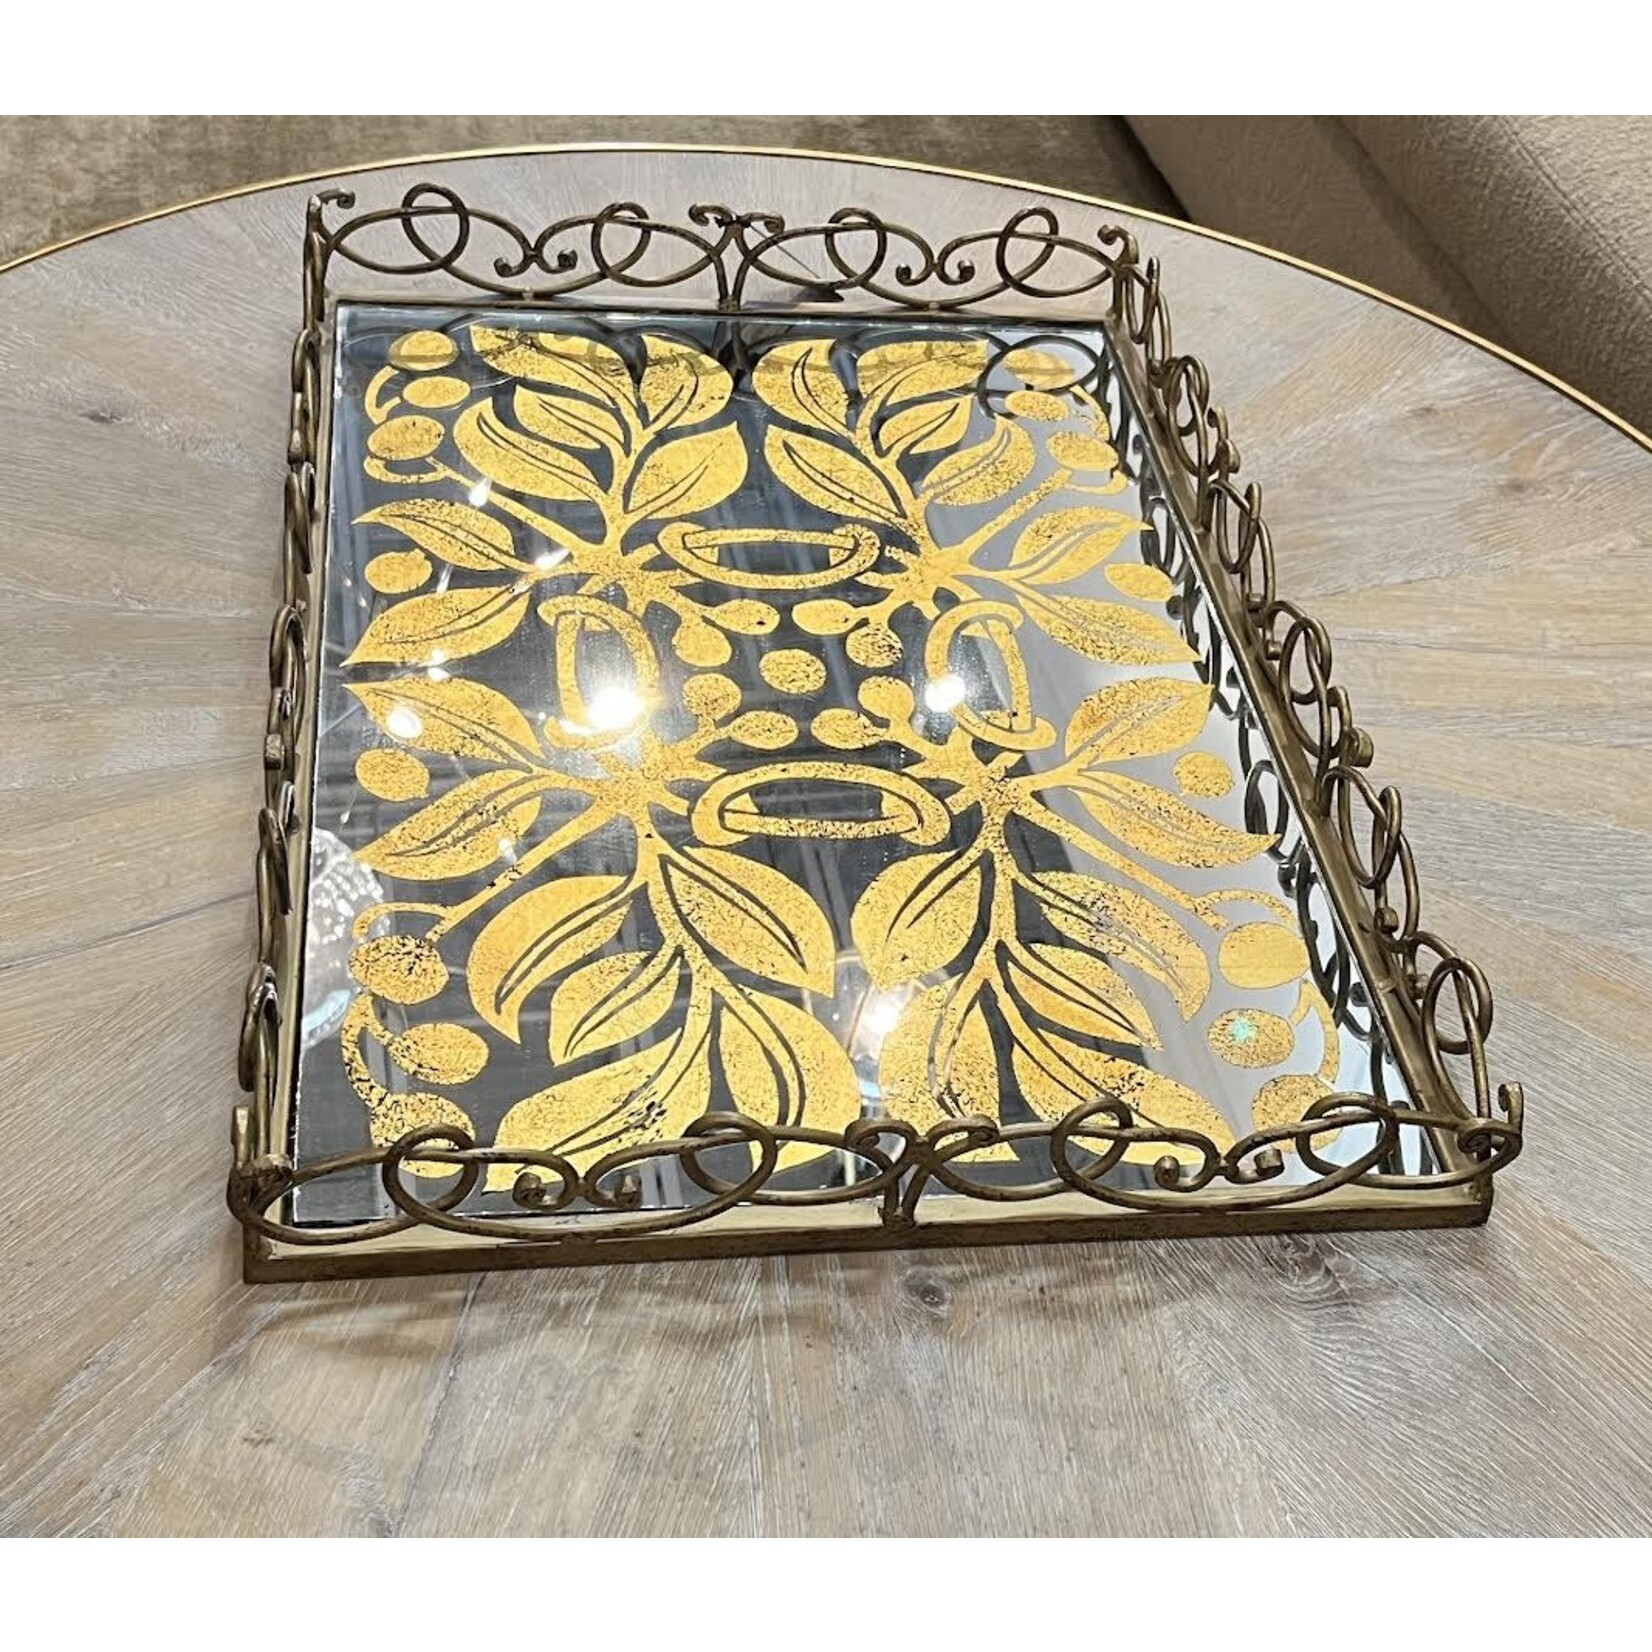 IMS - Showroom Mirror Tray  with Painted Gold Leaf Filigree